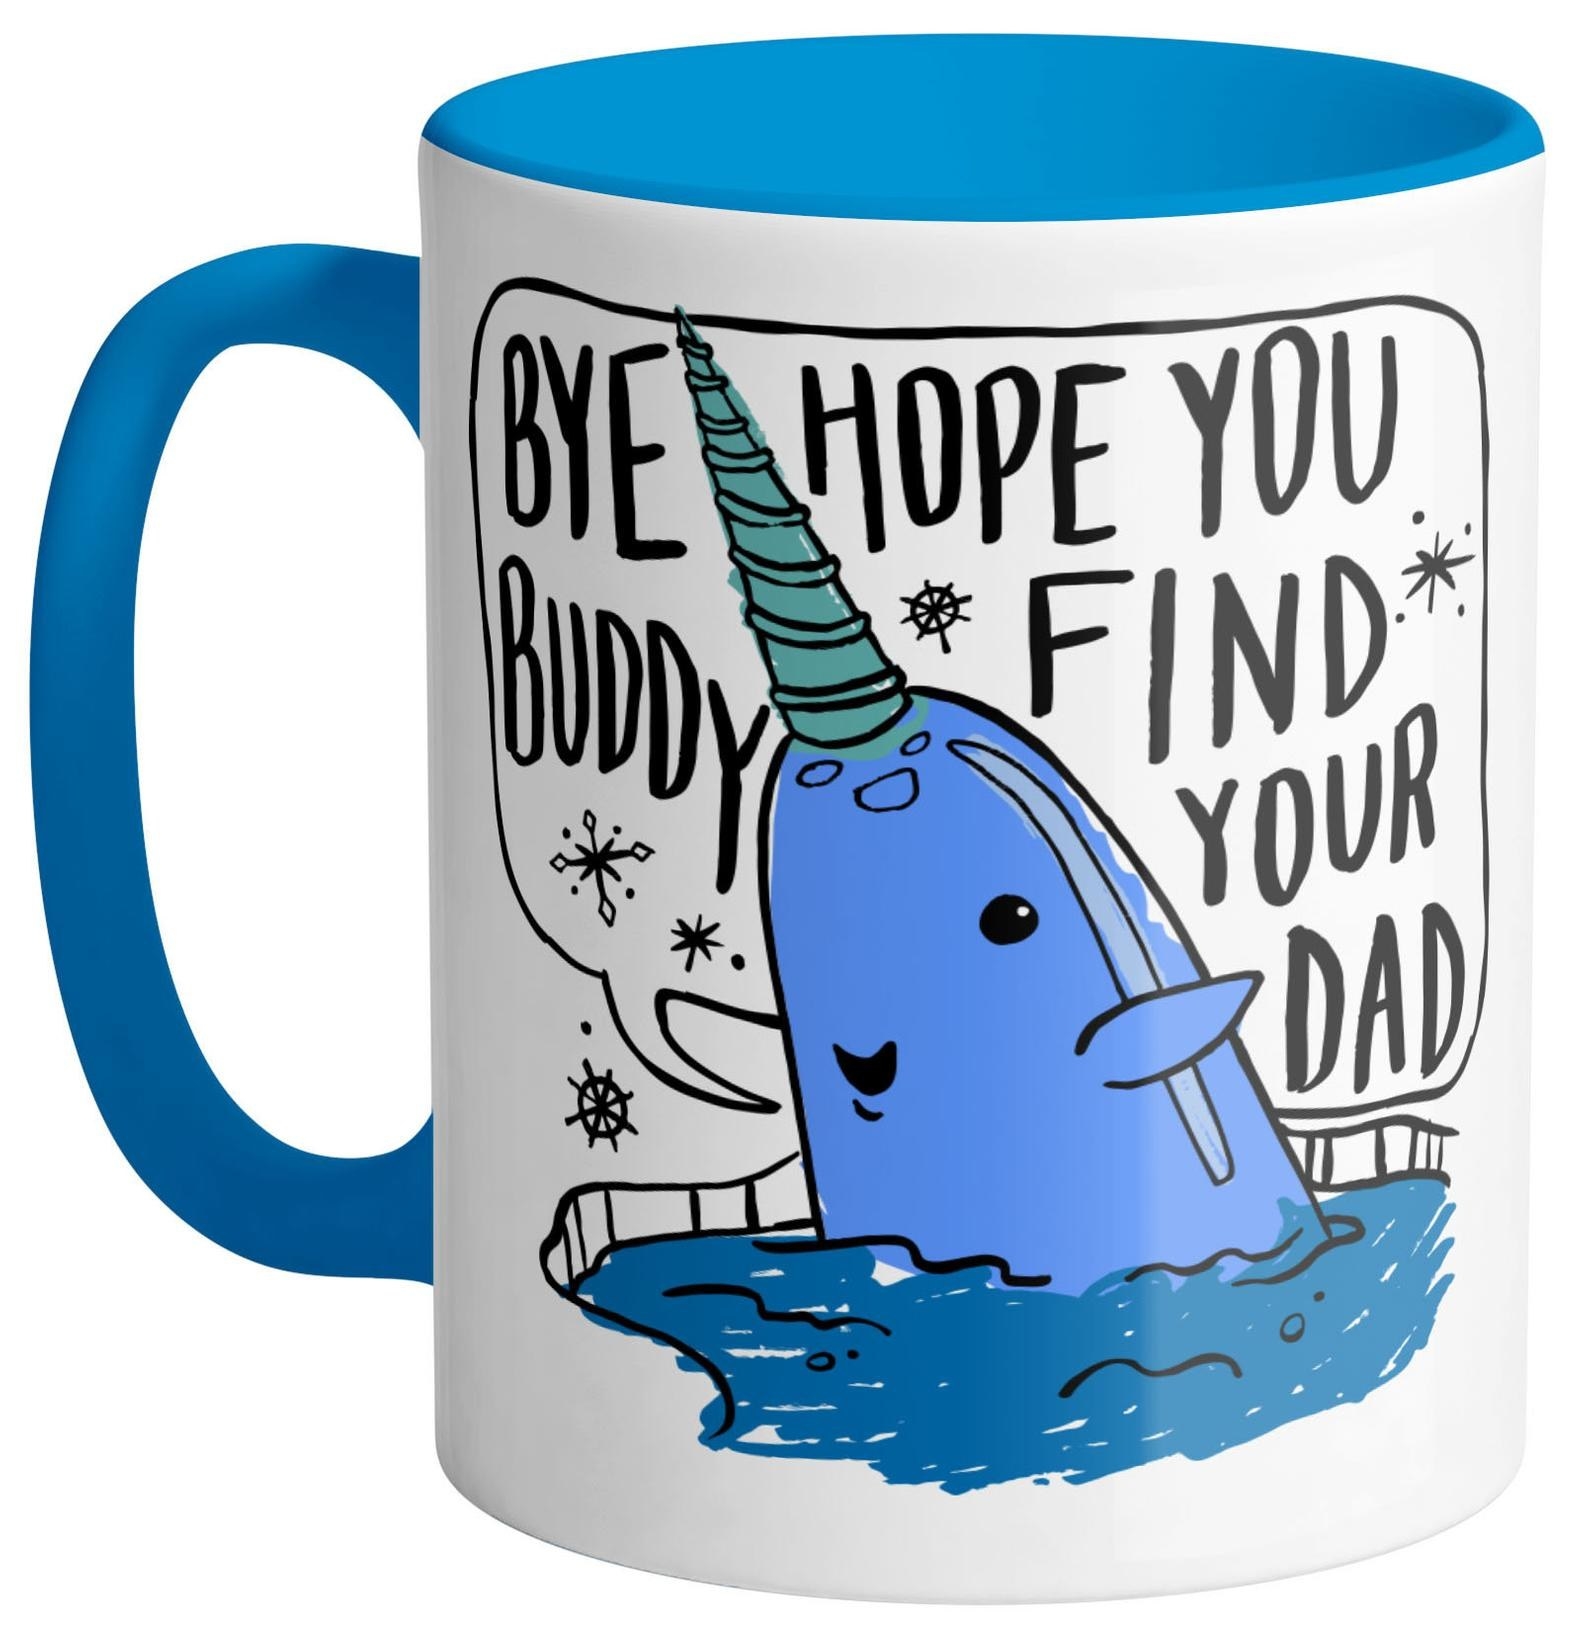 a white mug with a design of a narwhal on it that says &quot;bye buddy, hope you find your dad&quot;